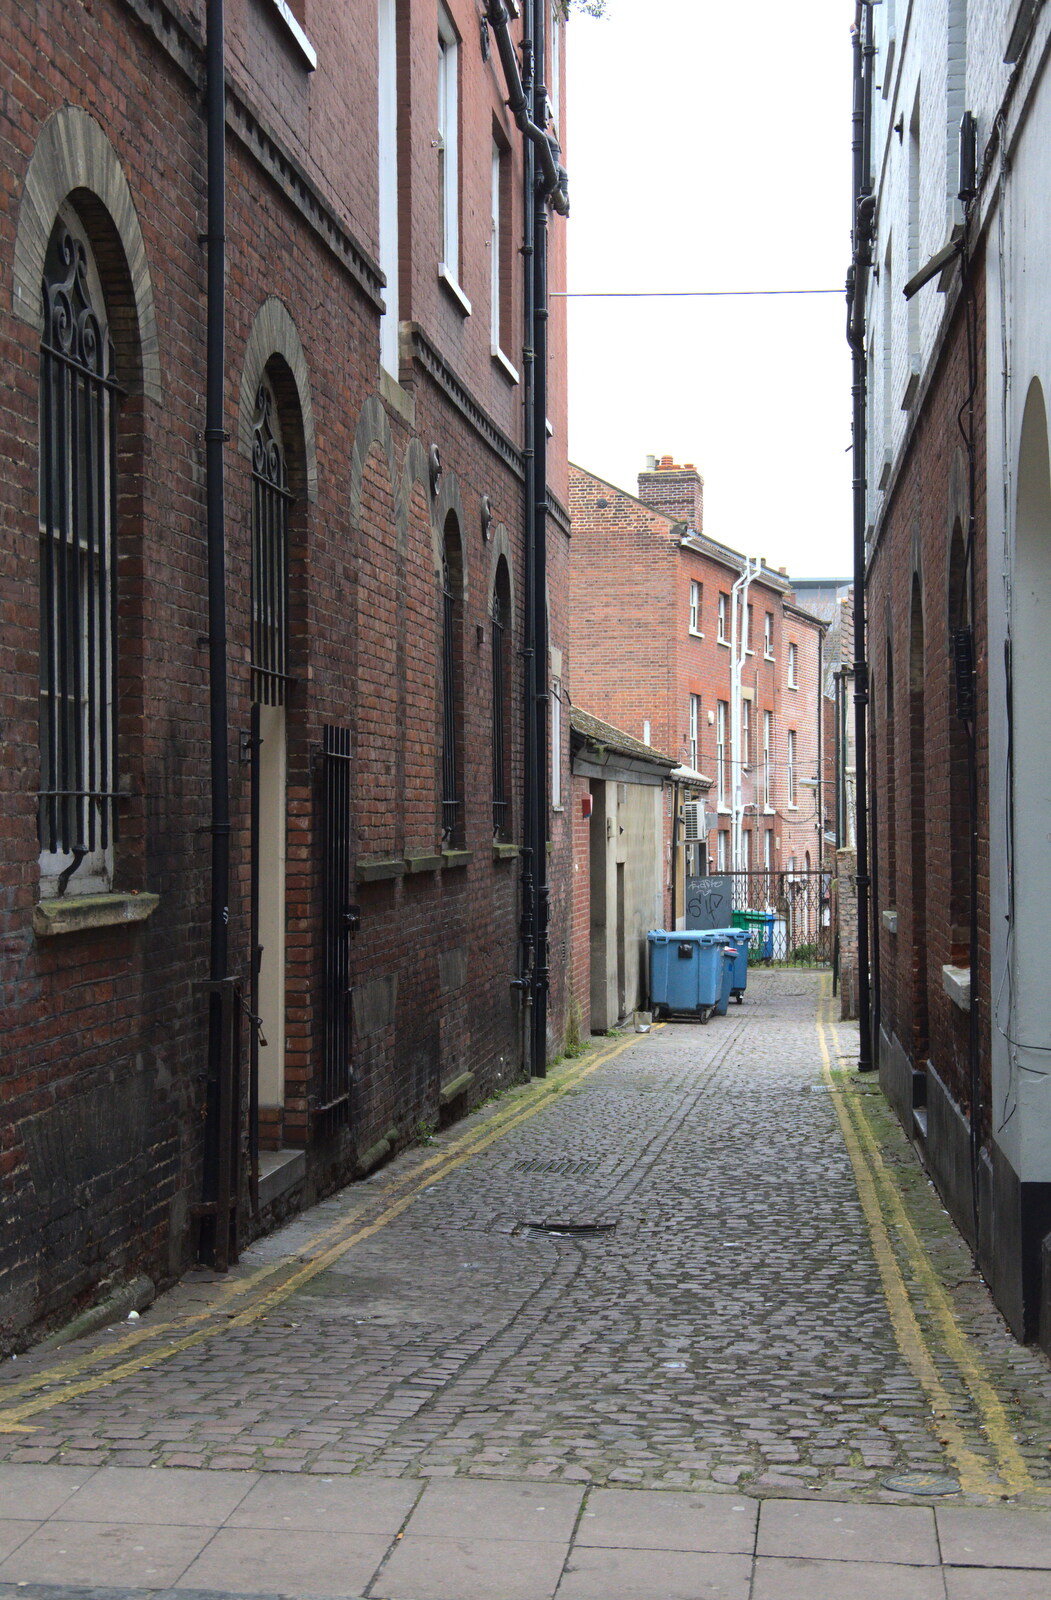 The narrow School Lane from A Trip to Cooke's Music, St. Benedict's Street, Norwich - 14th March 2020